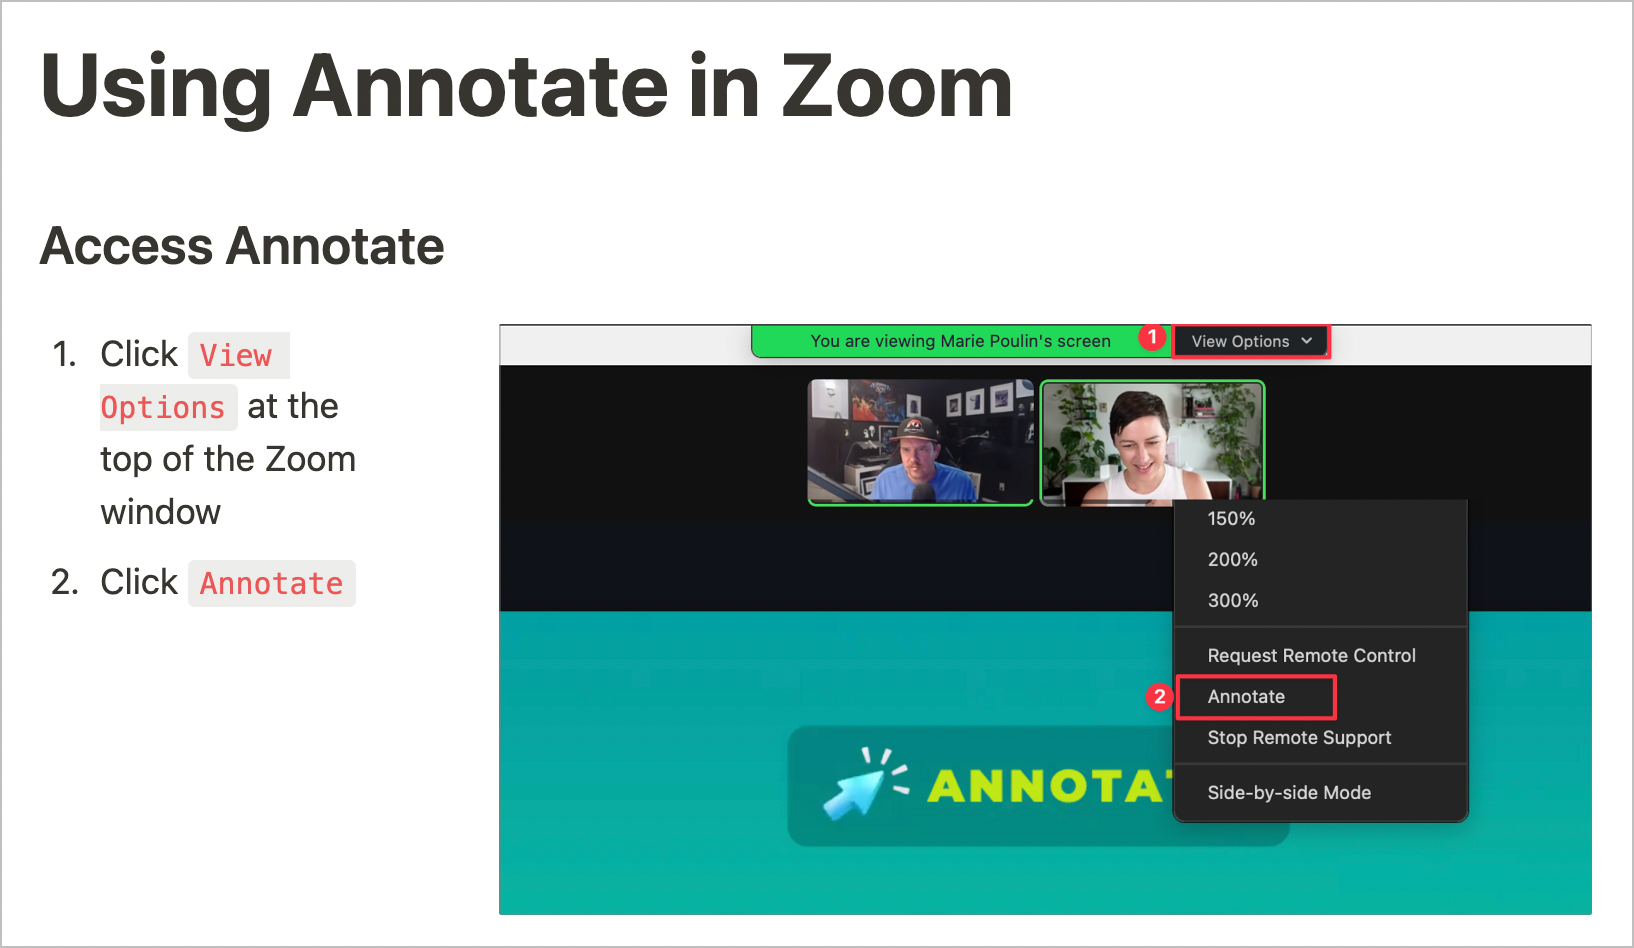 A Notion page with instructions to follow to use Annotate in Zoom.